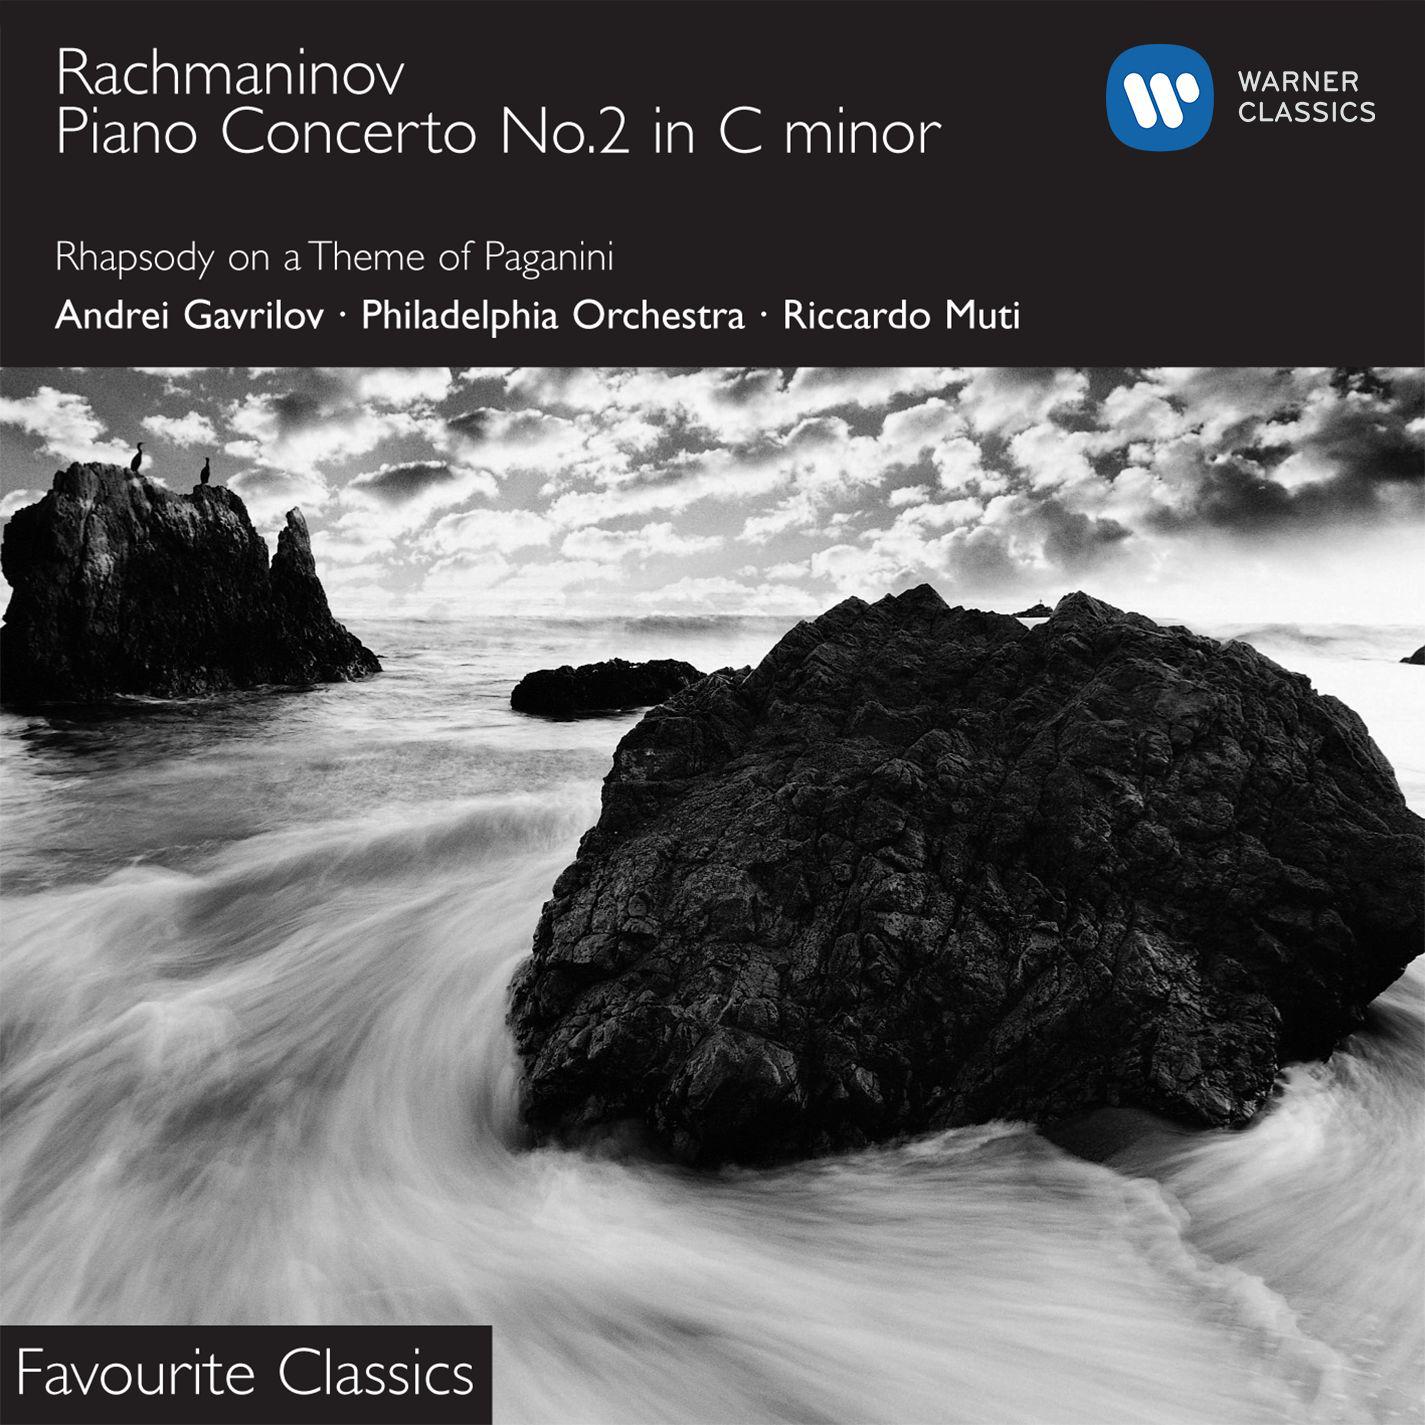 Rhapsody on a Theme of Paganini Op. 43: Variation X